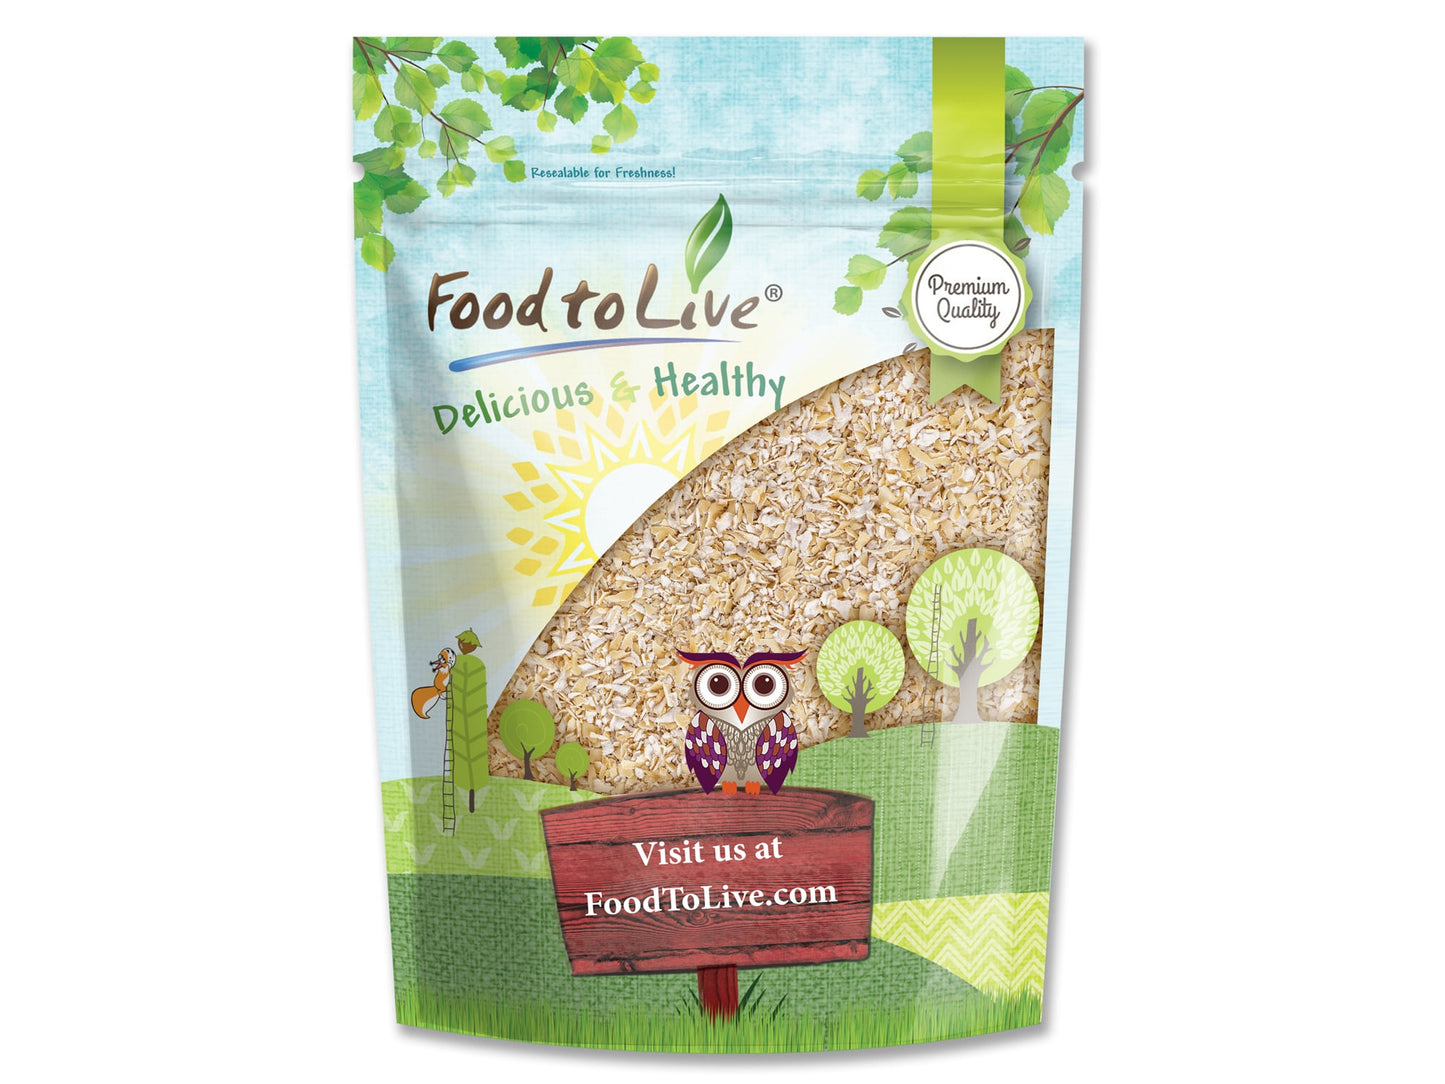 Oat Bran – A Nutritional Powerhouse High Fiber Hot Cereal, Milled from High Protein Oats. Raw, Unprocessed, Vegan, Kosher, Bulk. Good for Dukan Diet. Great for Baking and Porridge